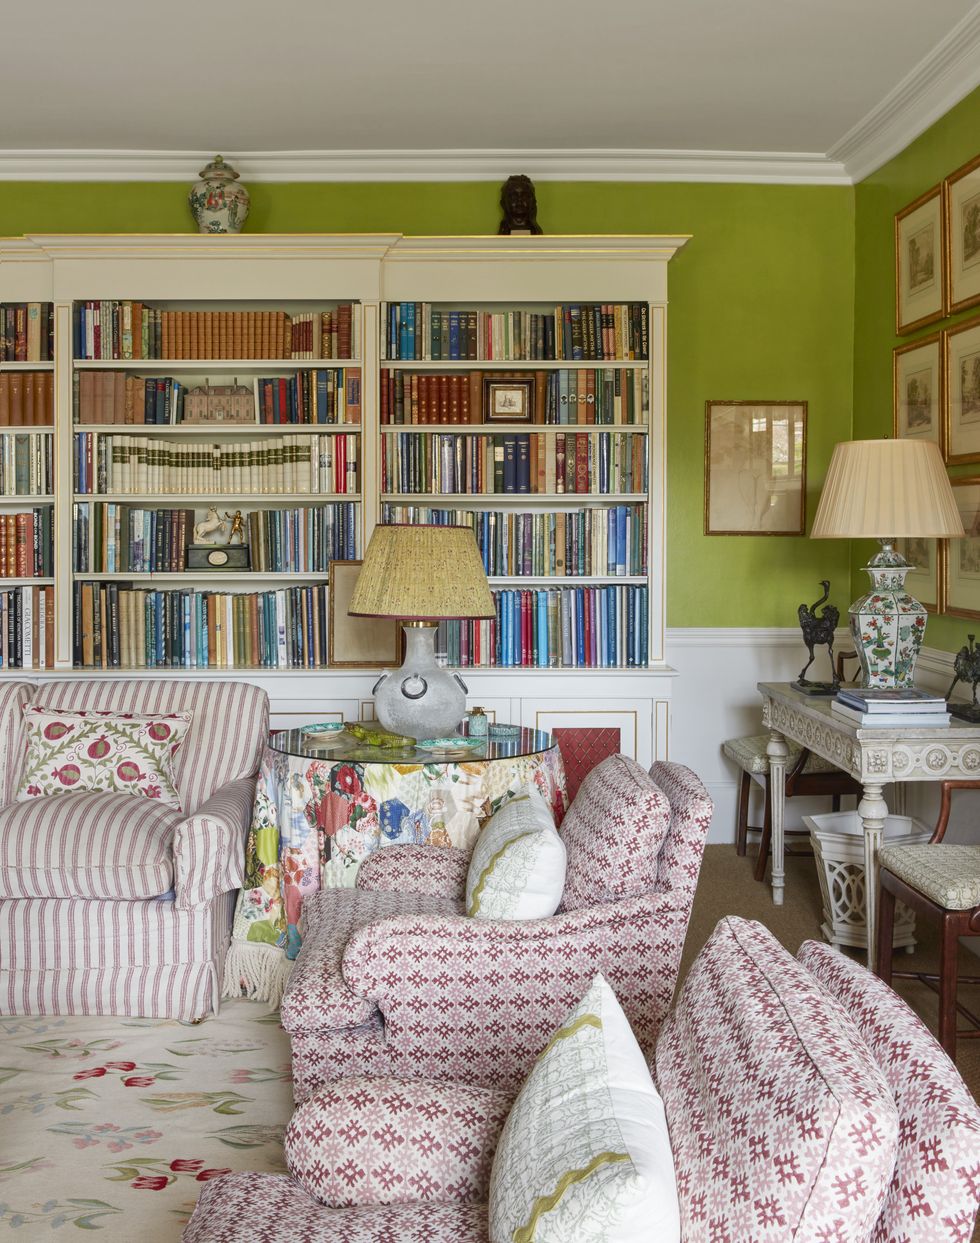 a table skirt made from old colefax and fowler sample books in a drawing room with book shelves and comfy chairs